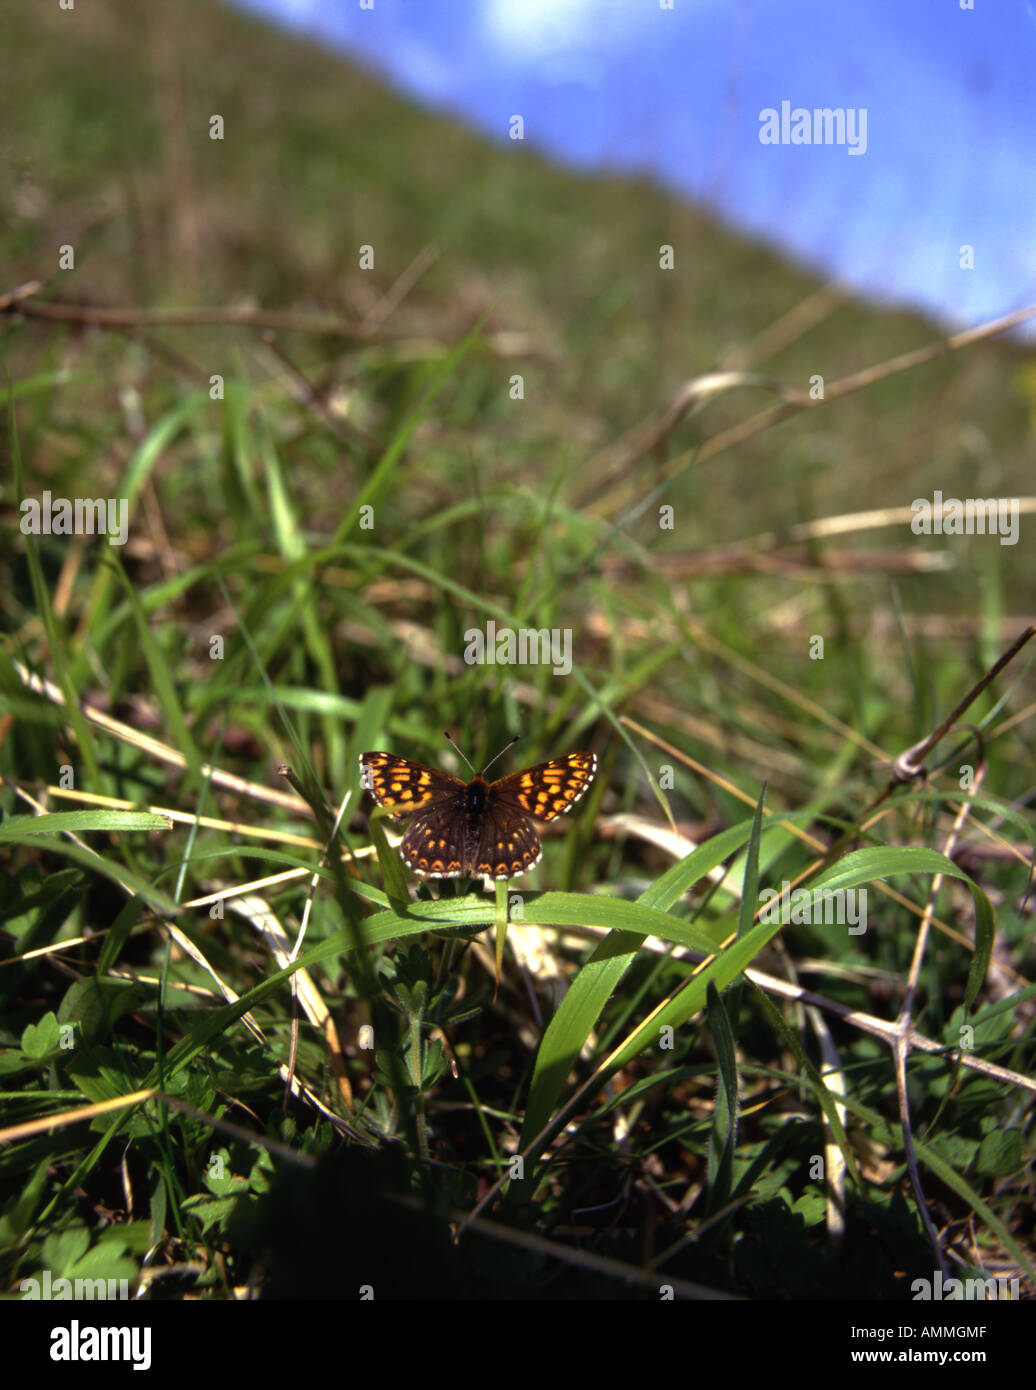 Duke of Burgundy butterfly. Wide angle view wings open resting on grass Noar Hill Nature Reserve Hampshire England Stock Photo